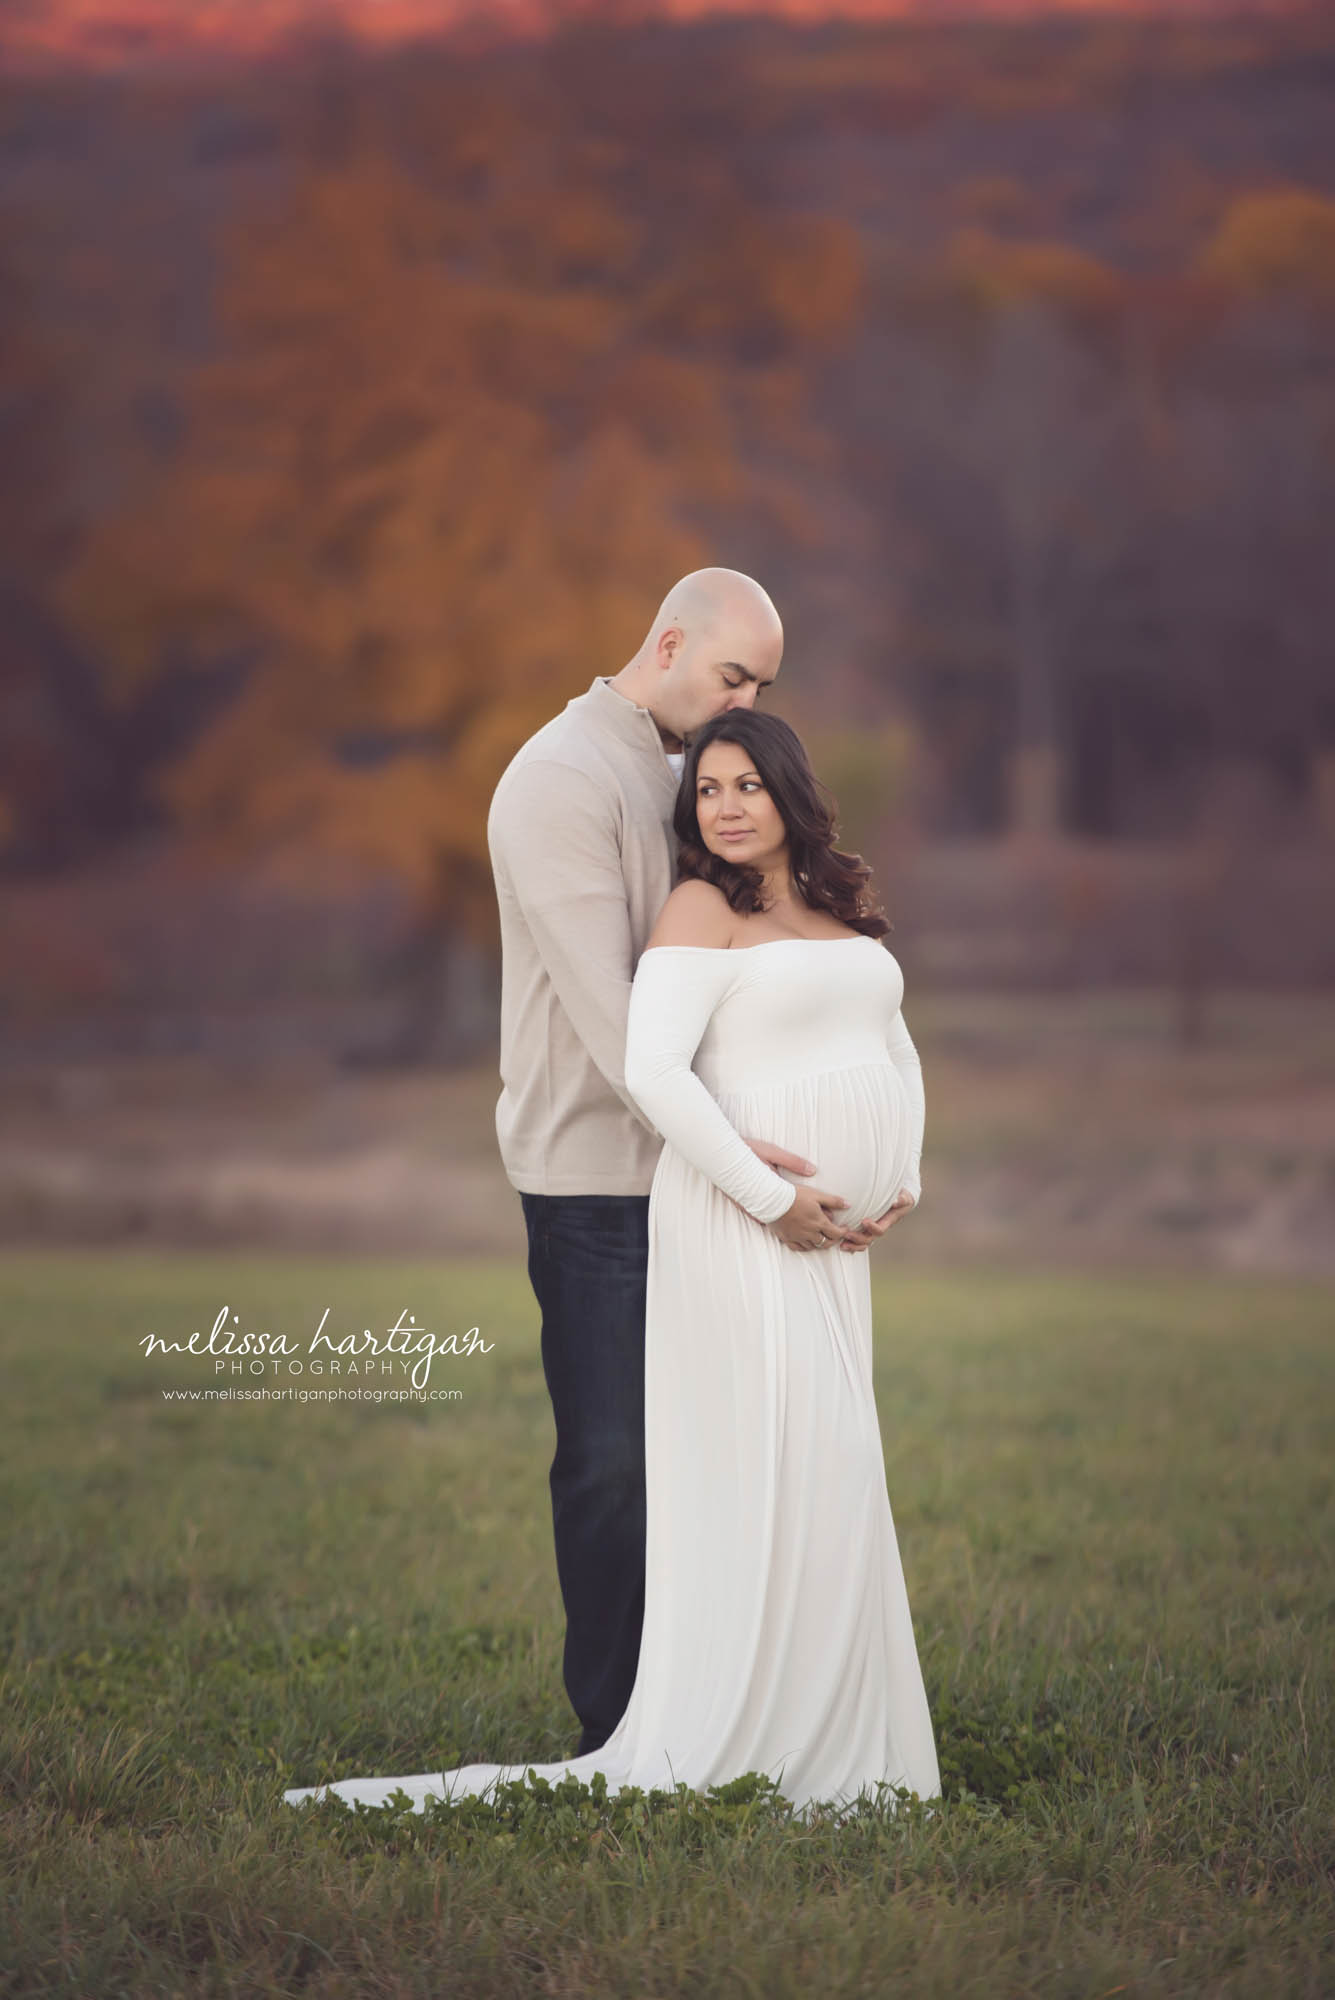 Melissa Hartigan Photography Connecticut Best Maternity Photographer in CT Coventry Ct Middlefield CT baby Fairfield county Newborn and maternity CT photographer Maternity photographer Parents-to-be outdoor session wearing white maternity dress husband standing behind holding belly in field